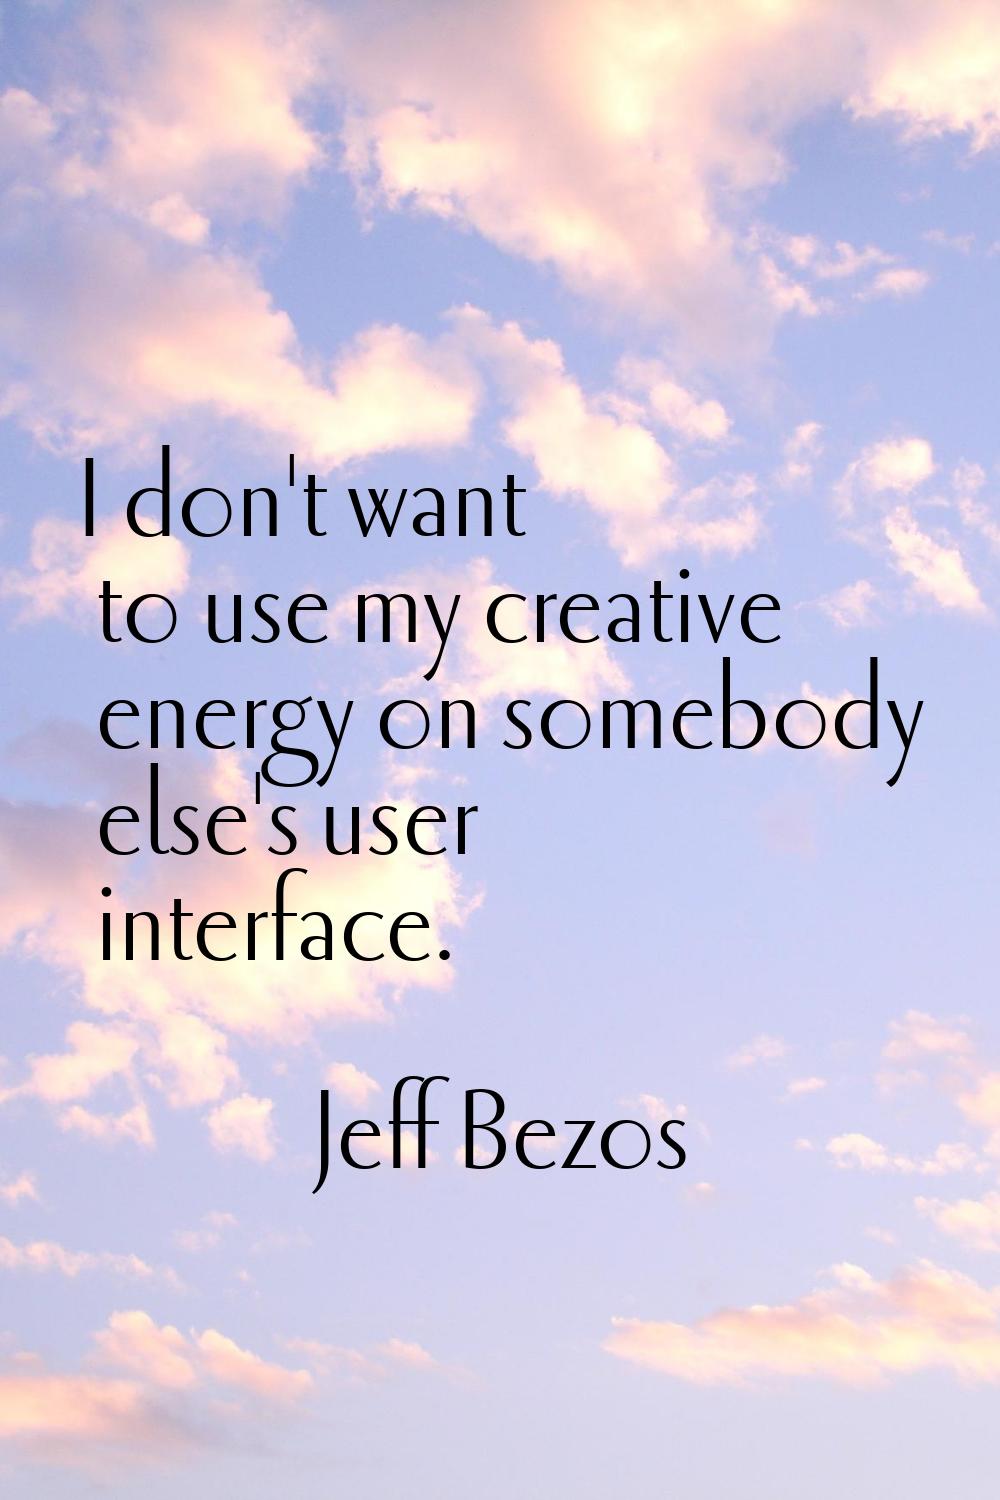 I don't want to use my creative energy on somebody else's user interface.